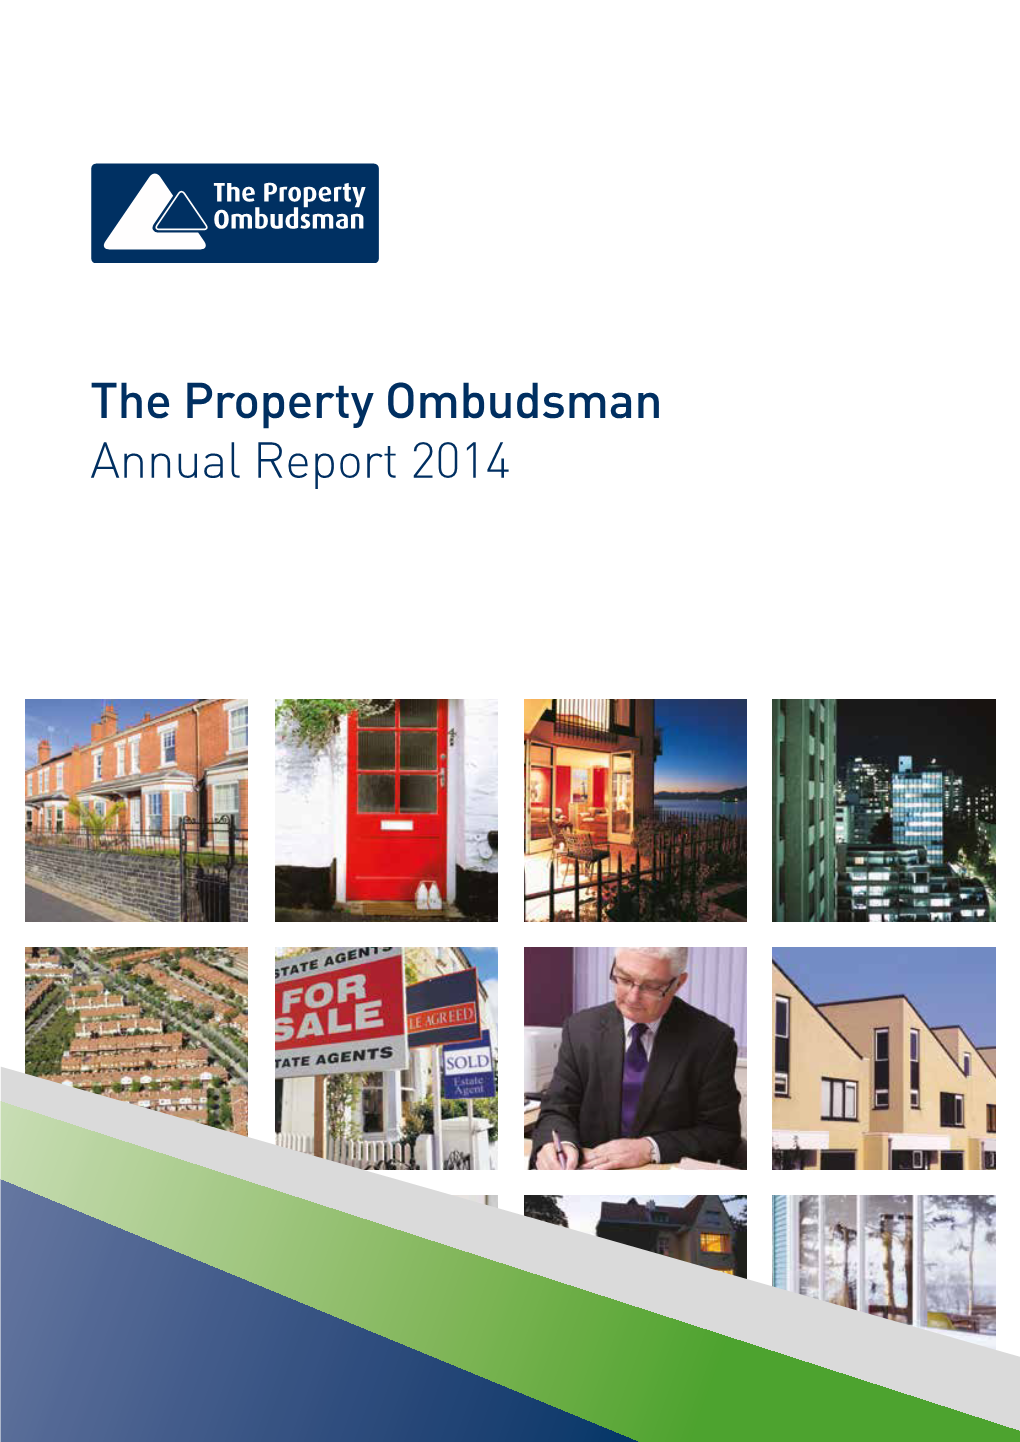 The Property Ombudsman Annual Report 2014